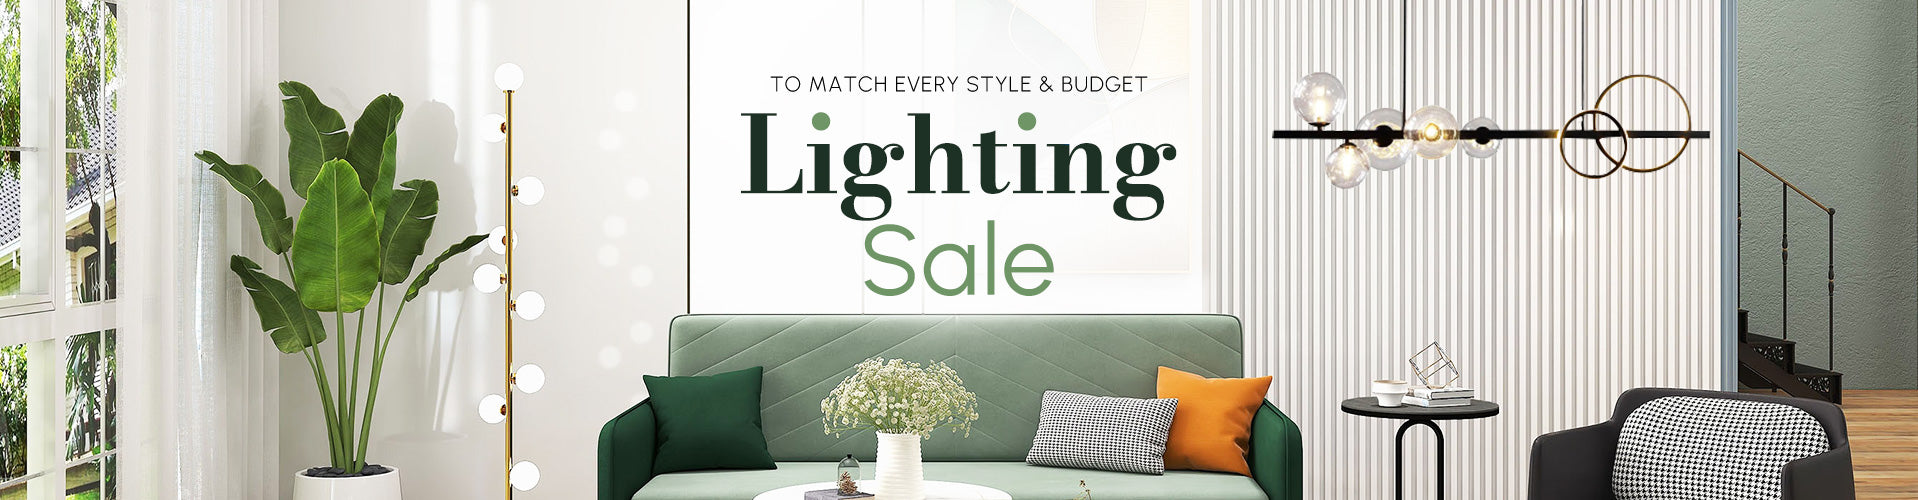 Lighting Buyout Price Ready to Ship With Extra 7% Off